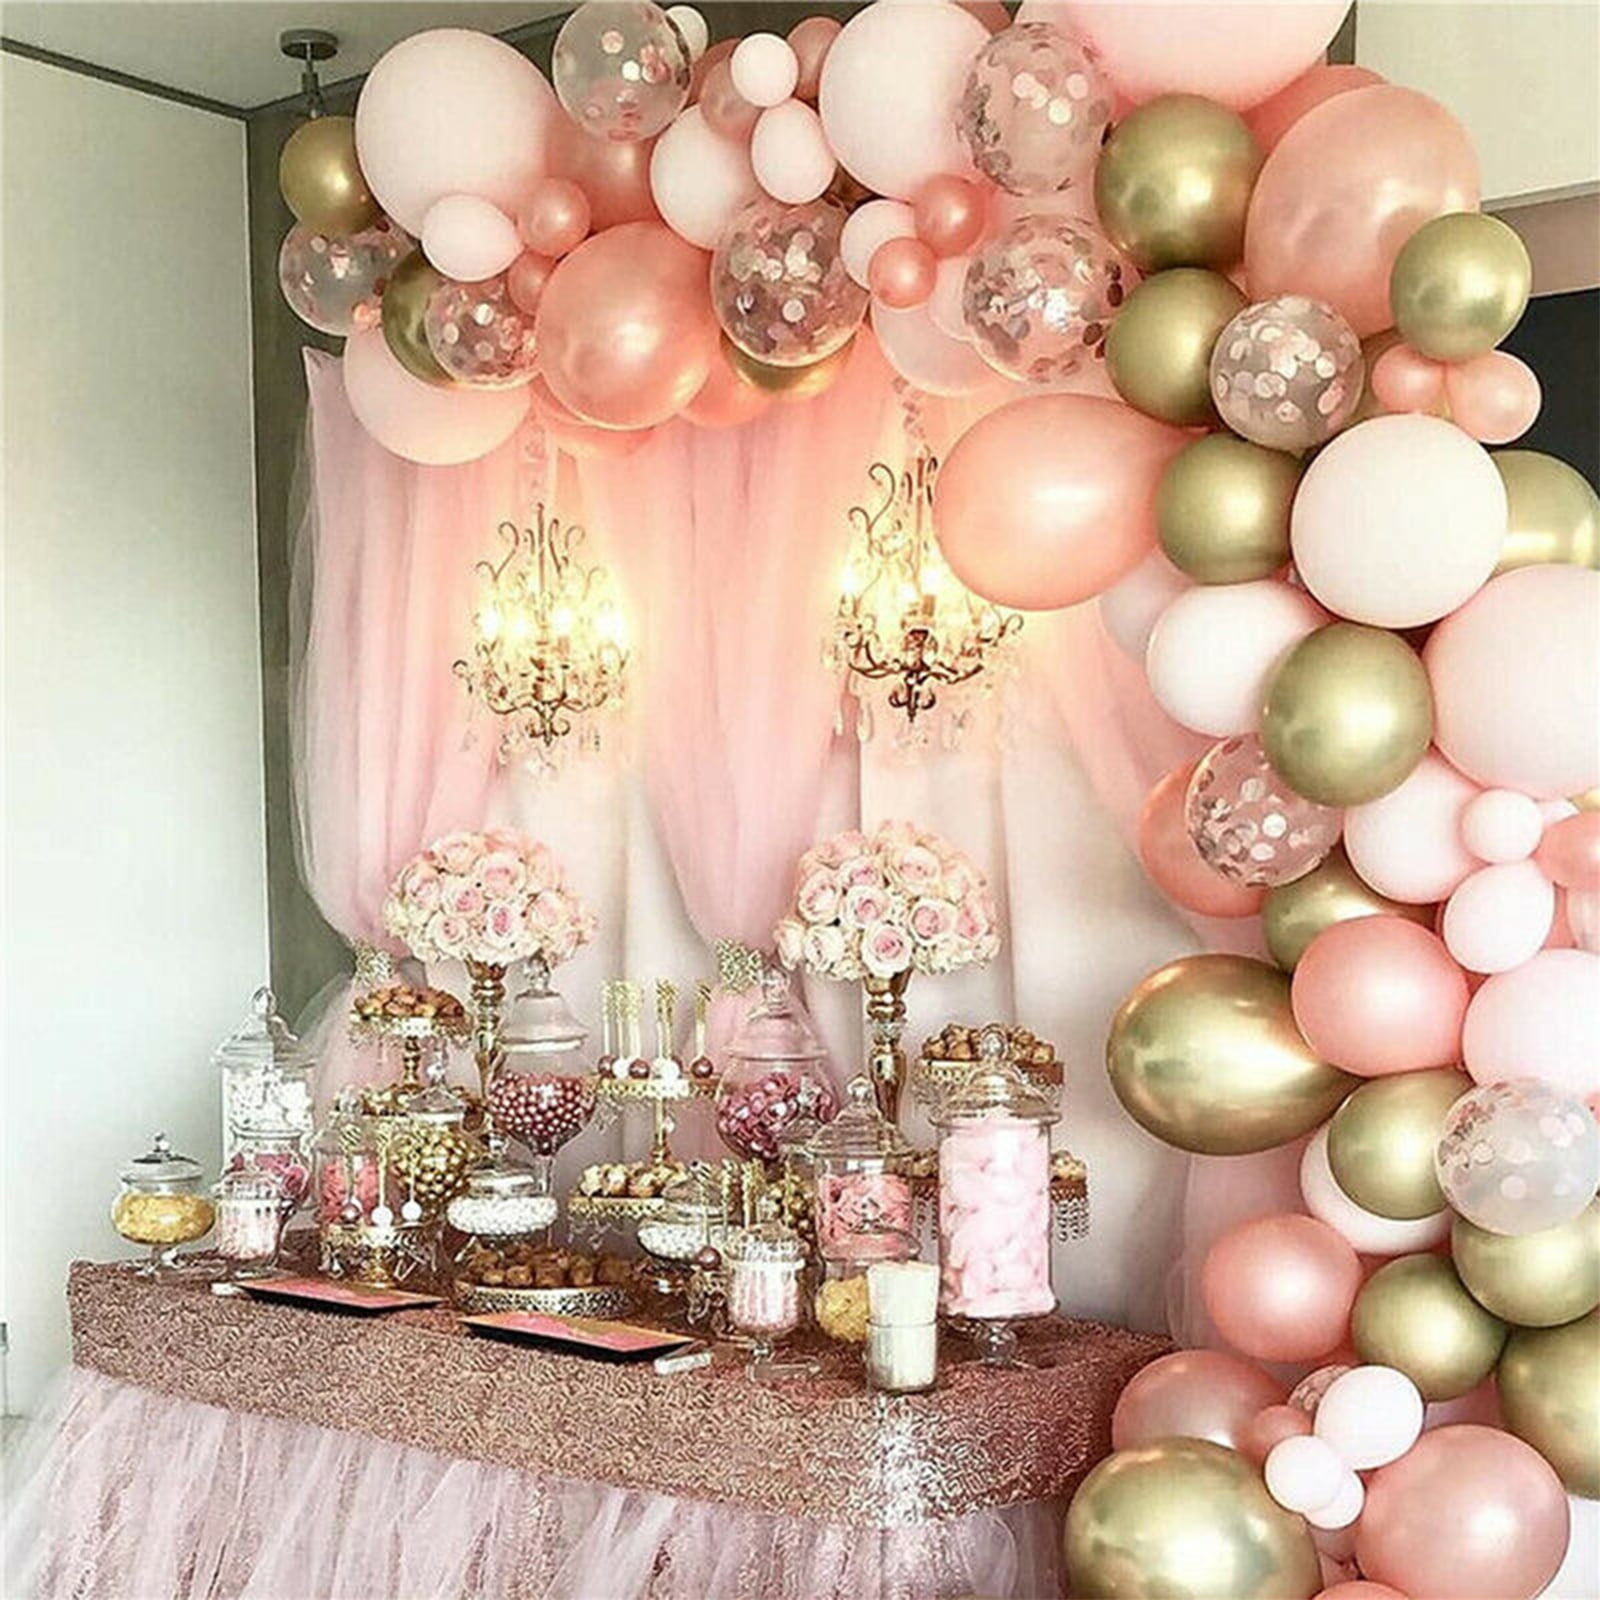 PROM - Rose Gold DCUK PROM 2019 16 ROSE GOLD LETTER BALLOONS DECORATION